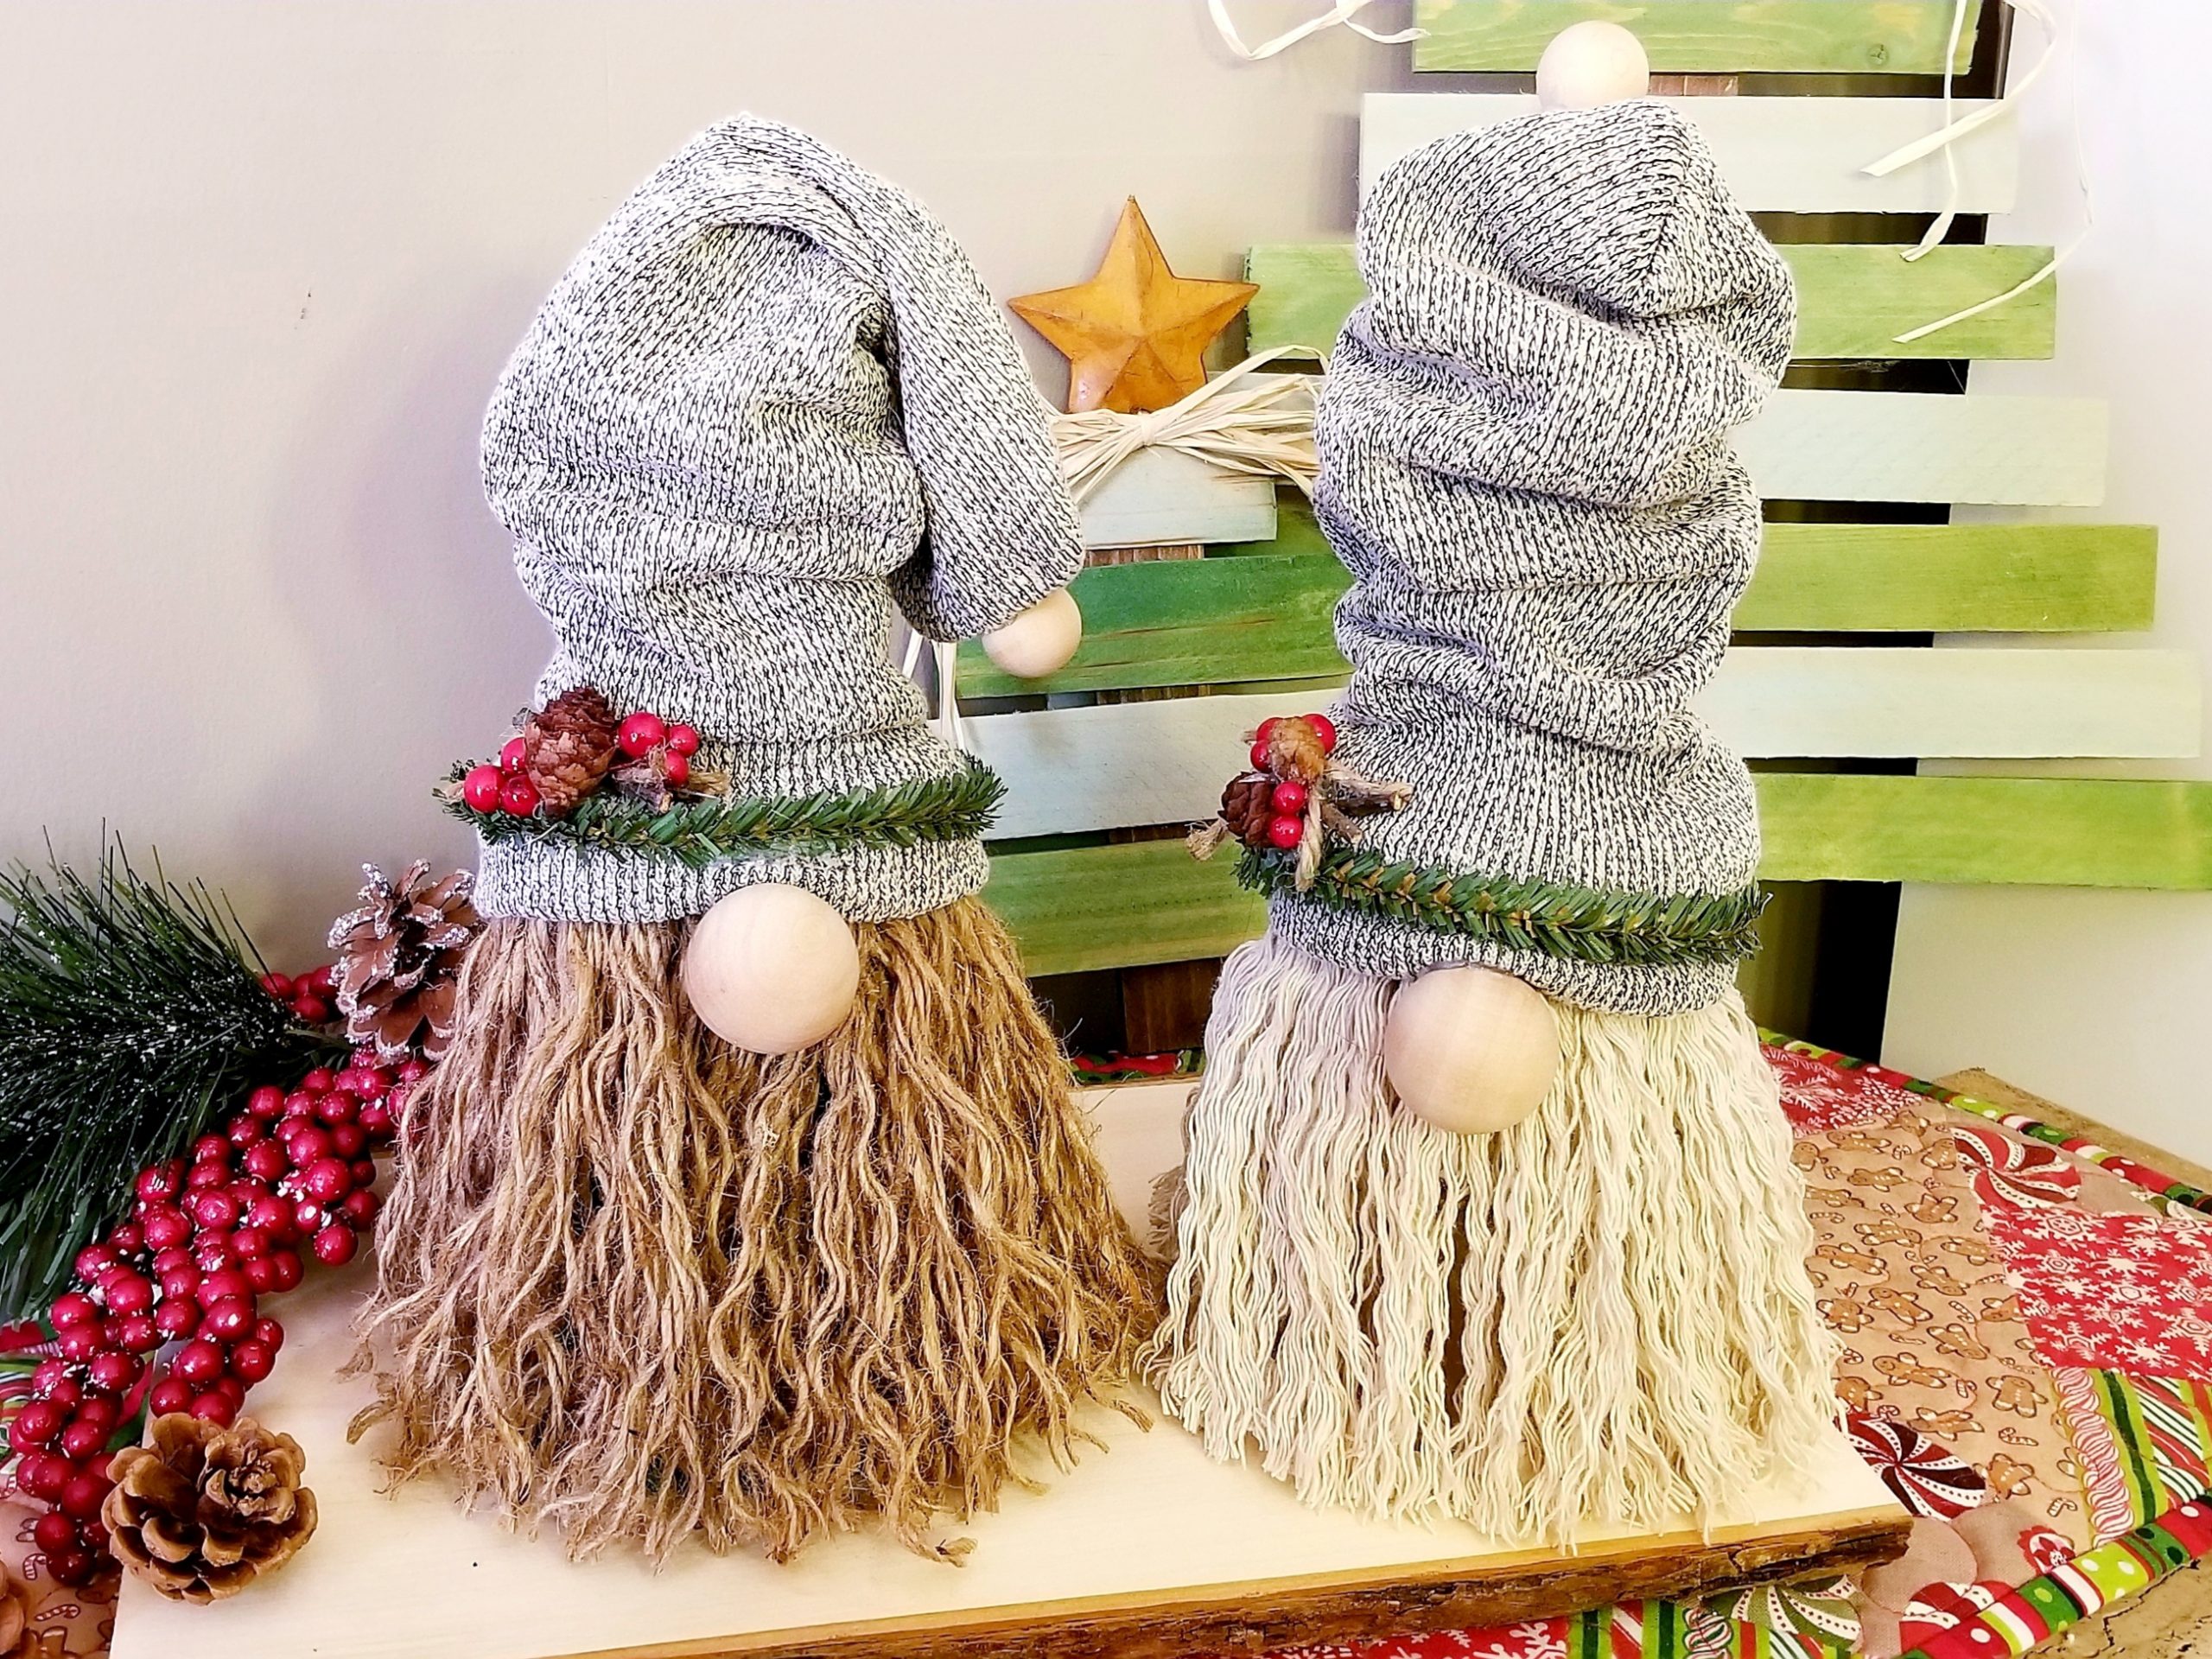 DIY Christmas Tree Gnomes. From Christmas trees to your front